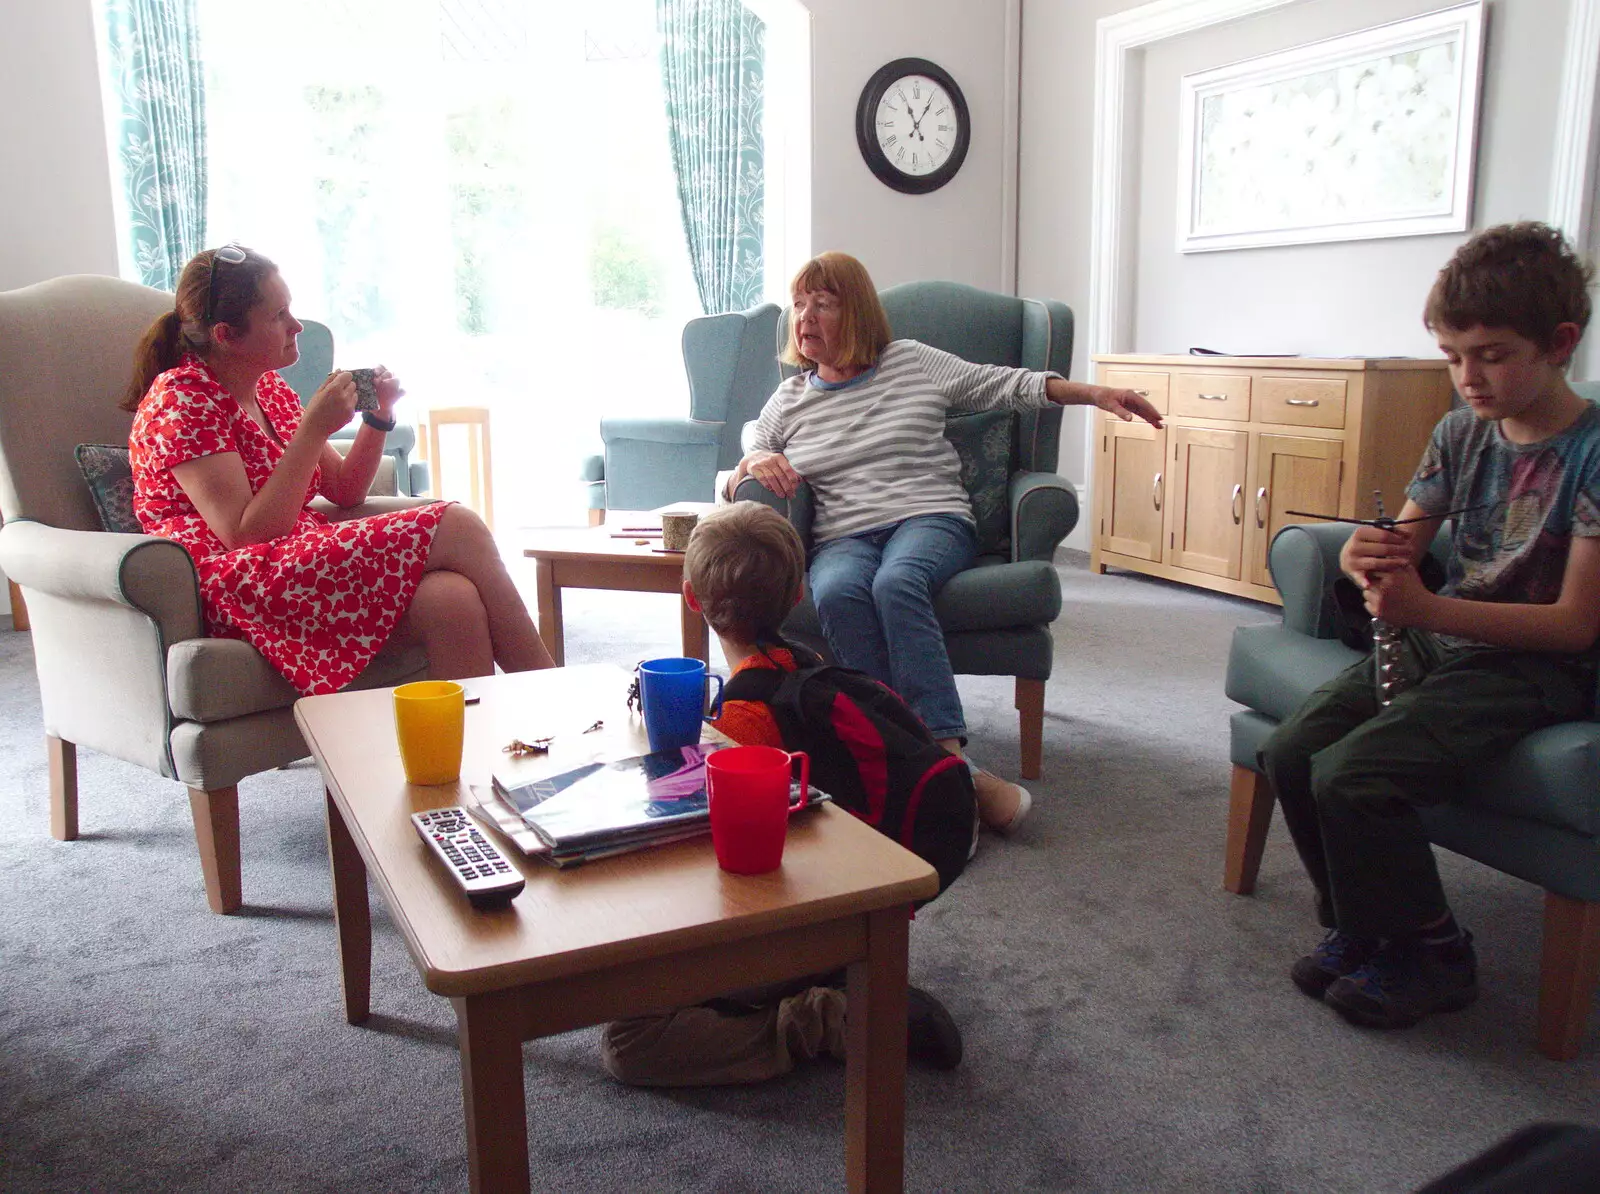 Isobel chats to Grandma J, from Chagford Lido and a Trip to Parke, Bovey Tracey, Devon - 25th May 2019